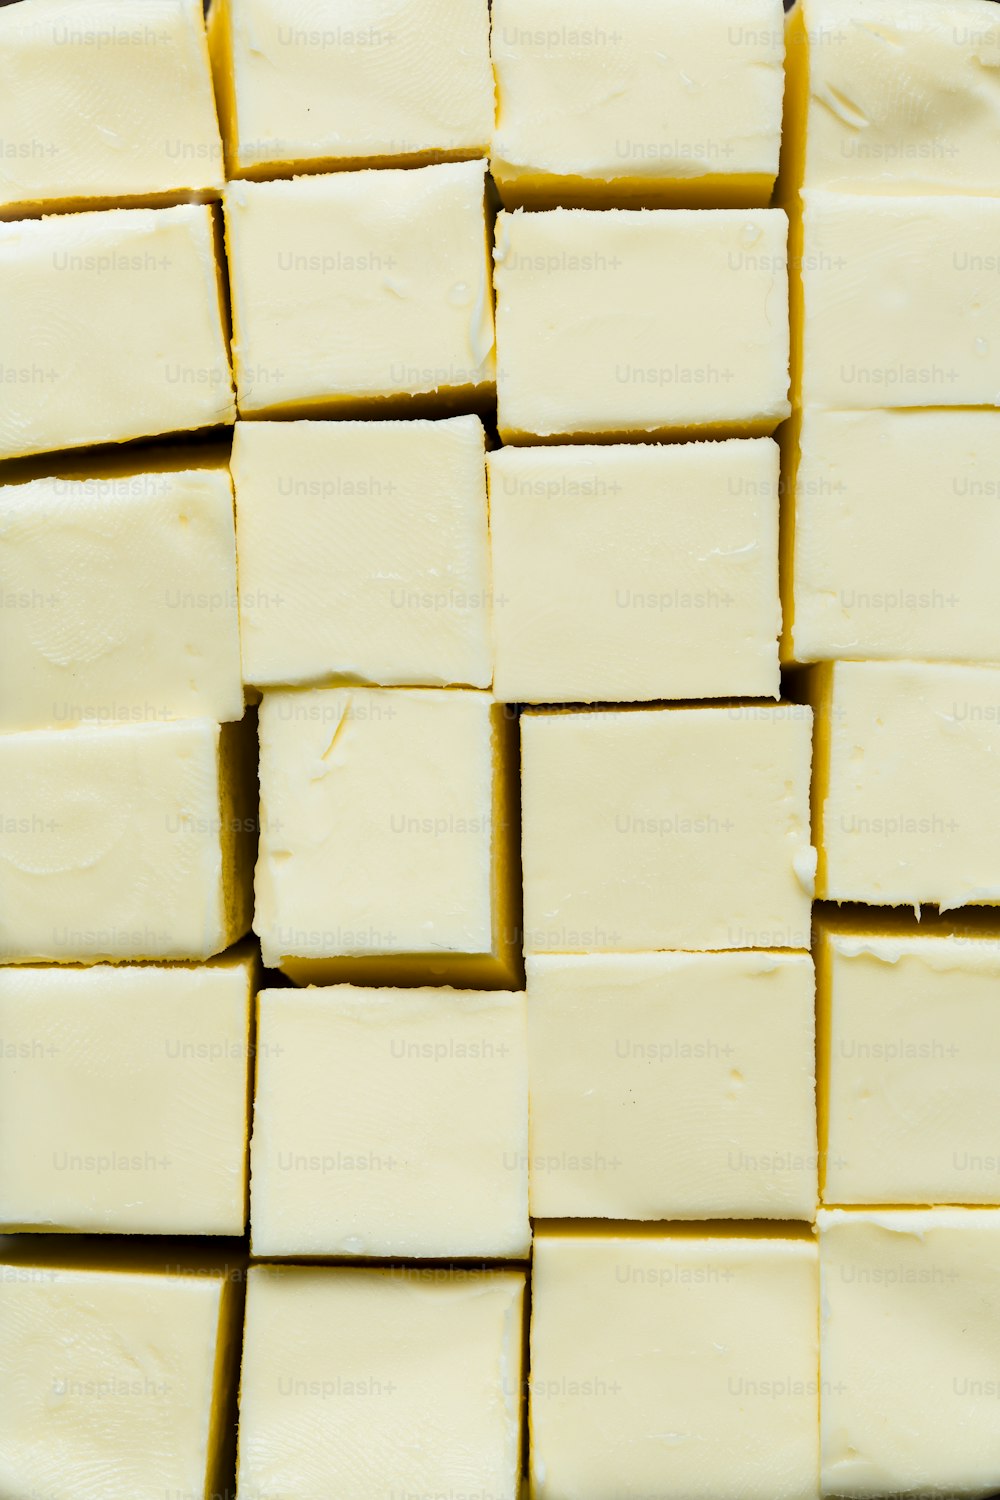 a close up of many squares of butter